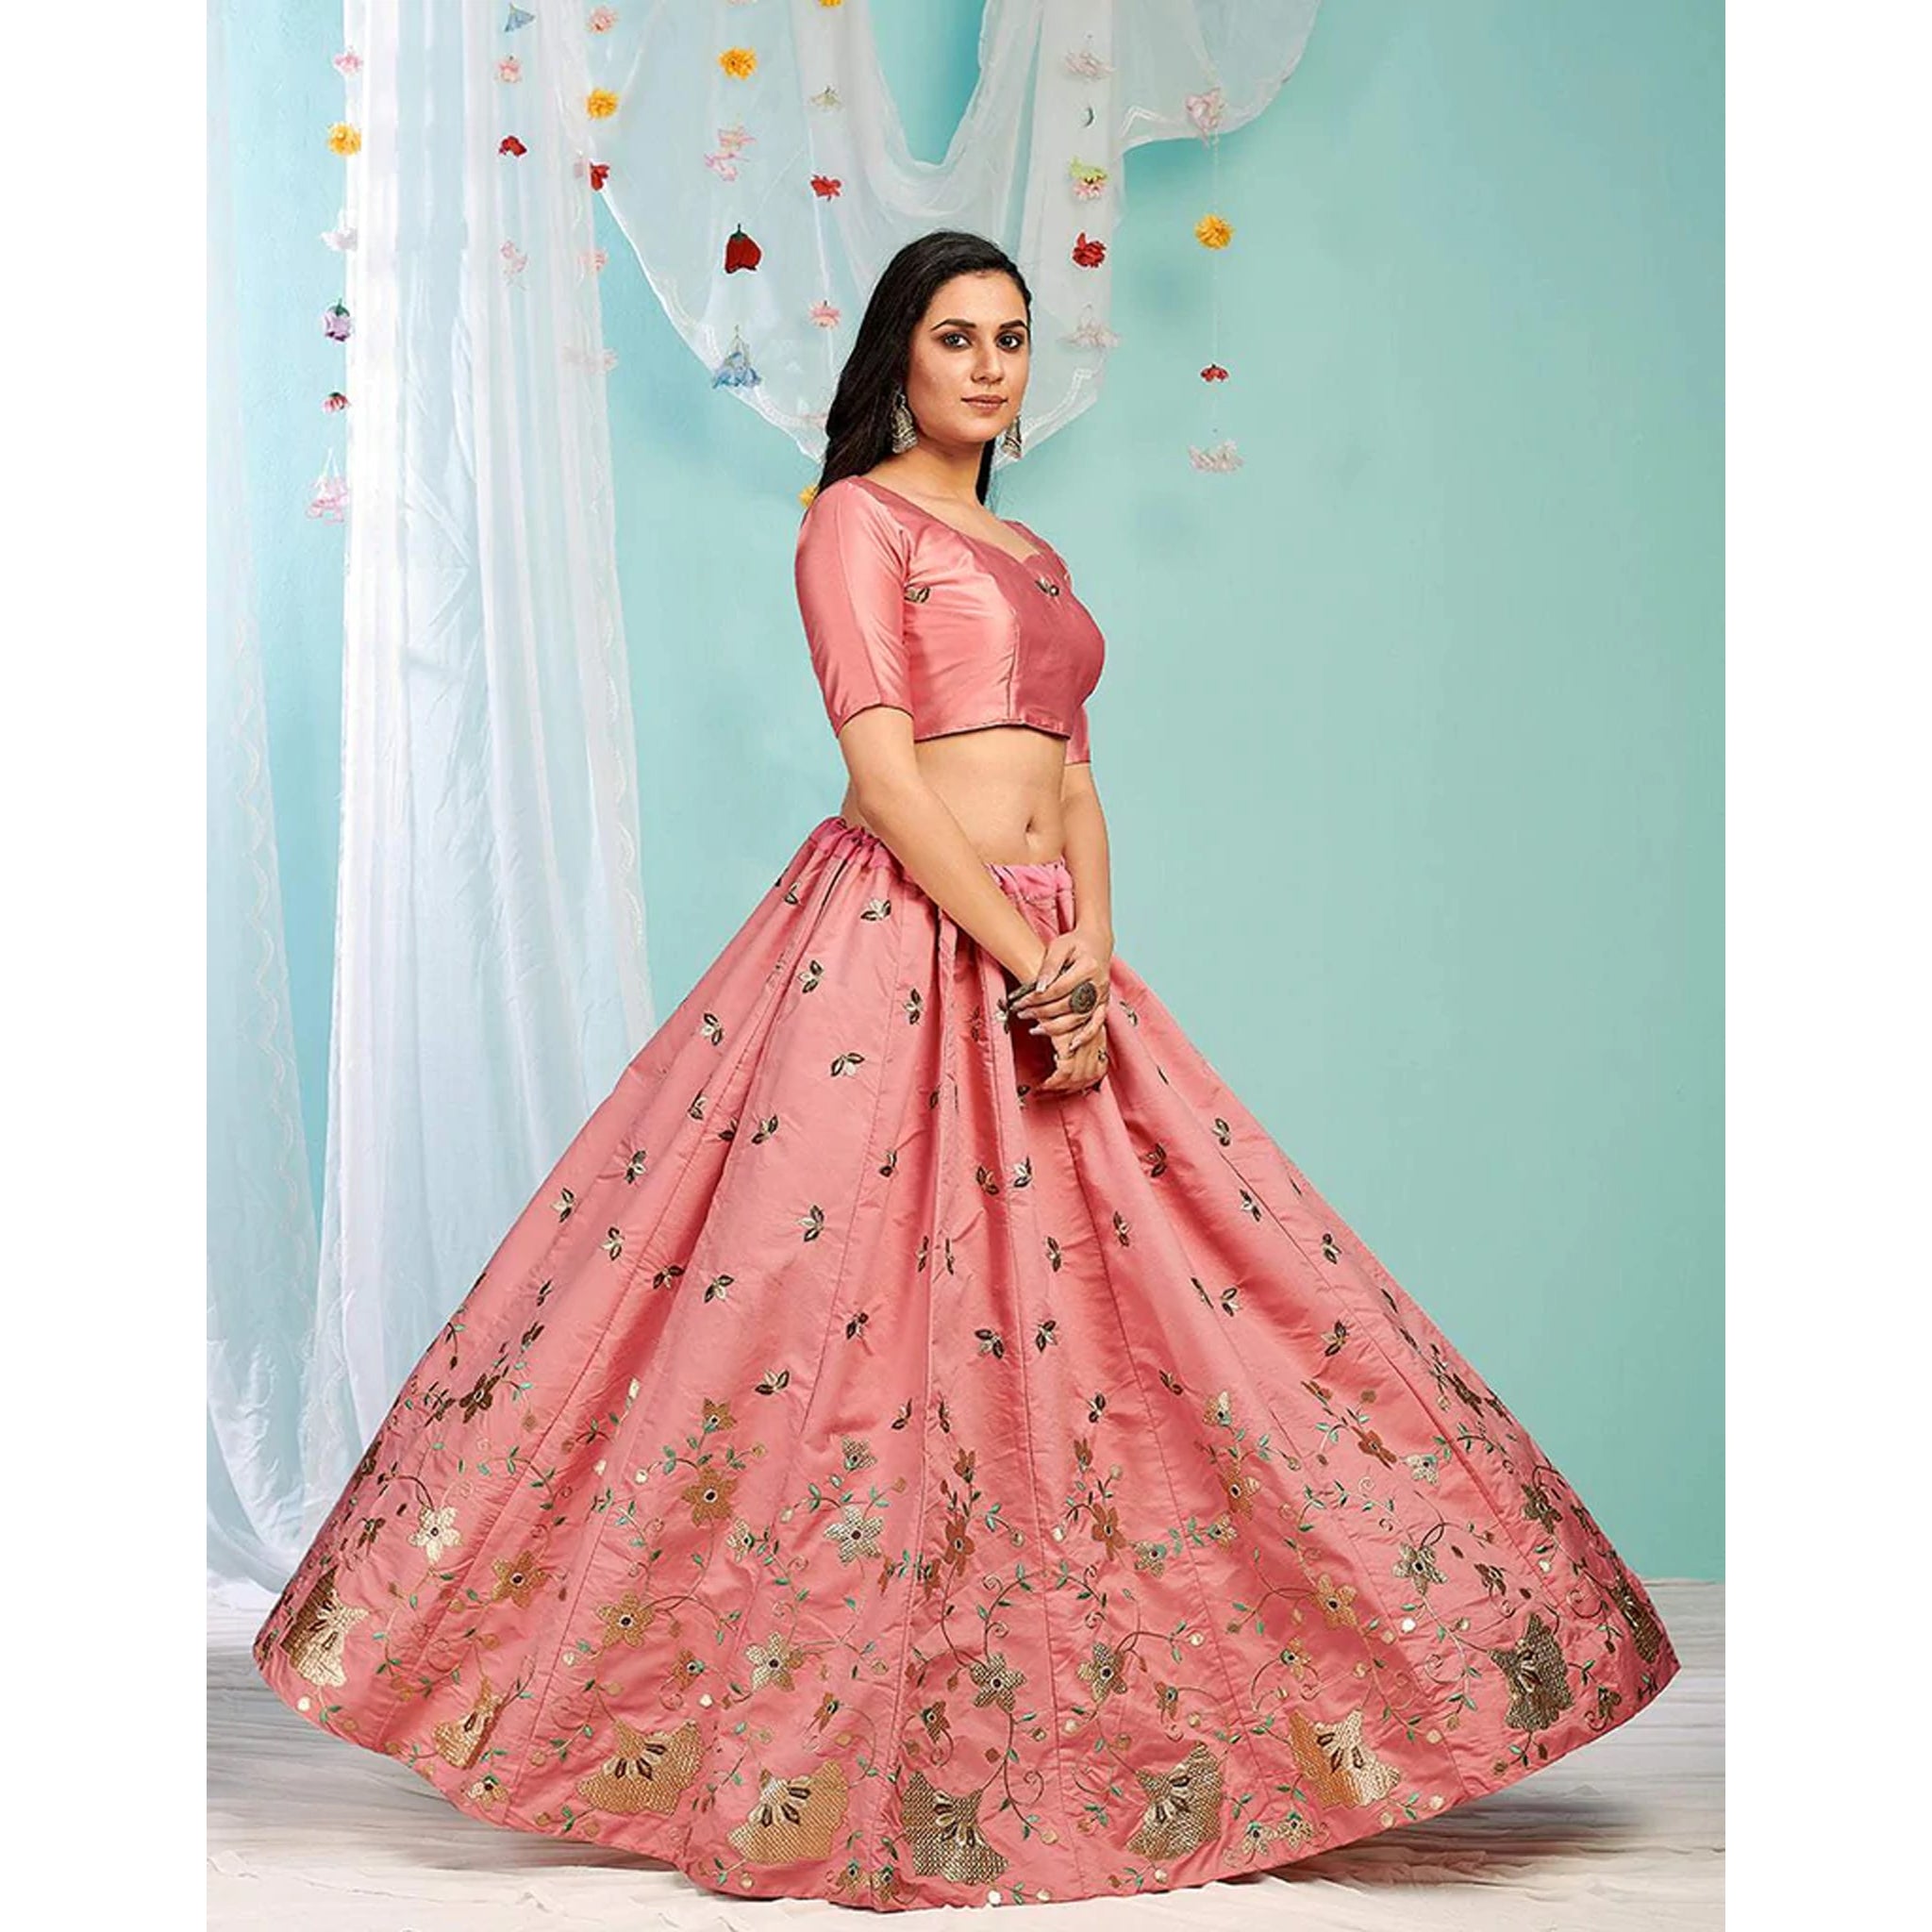 Vintage Inspired Princess Dresses For Adults With Light Pink Embroidery And  Flower Veil Customizable Size Available From Greatwallnb, $141.12 |  DHgate.Com